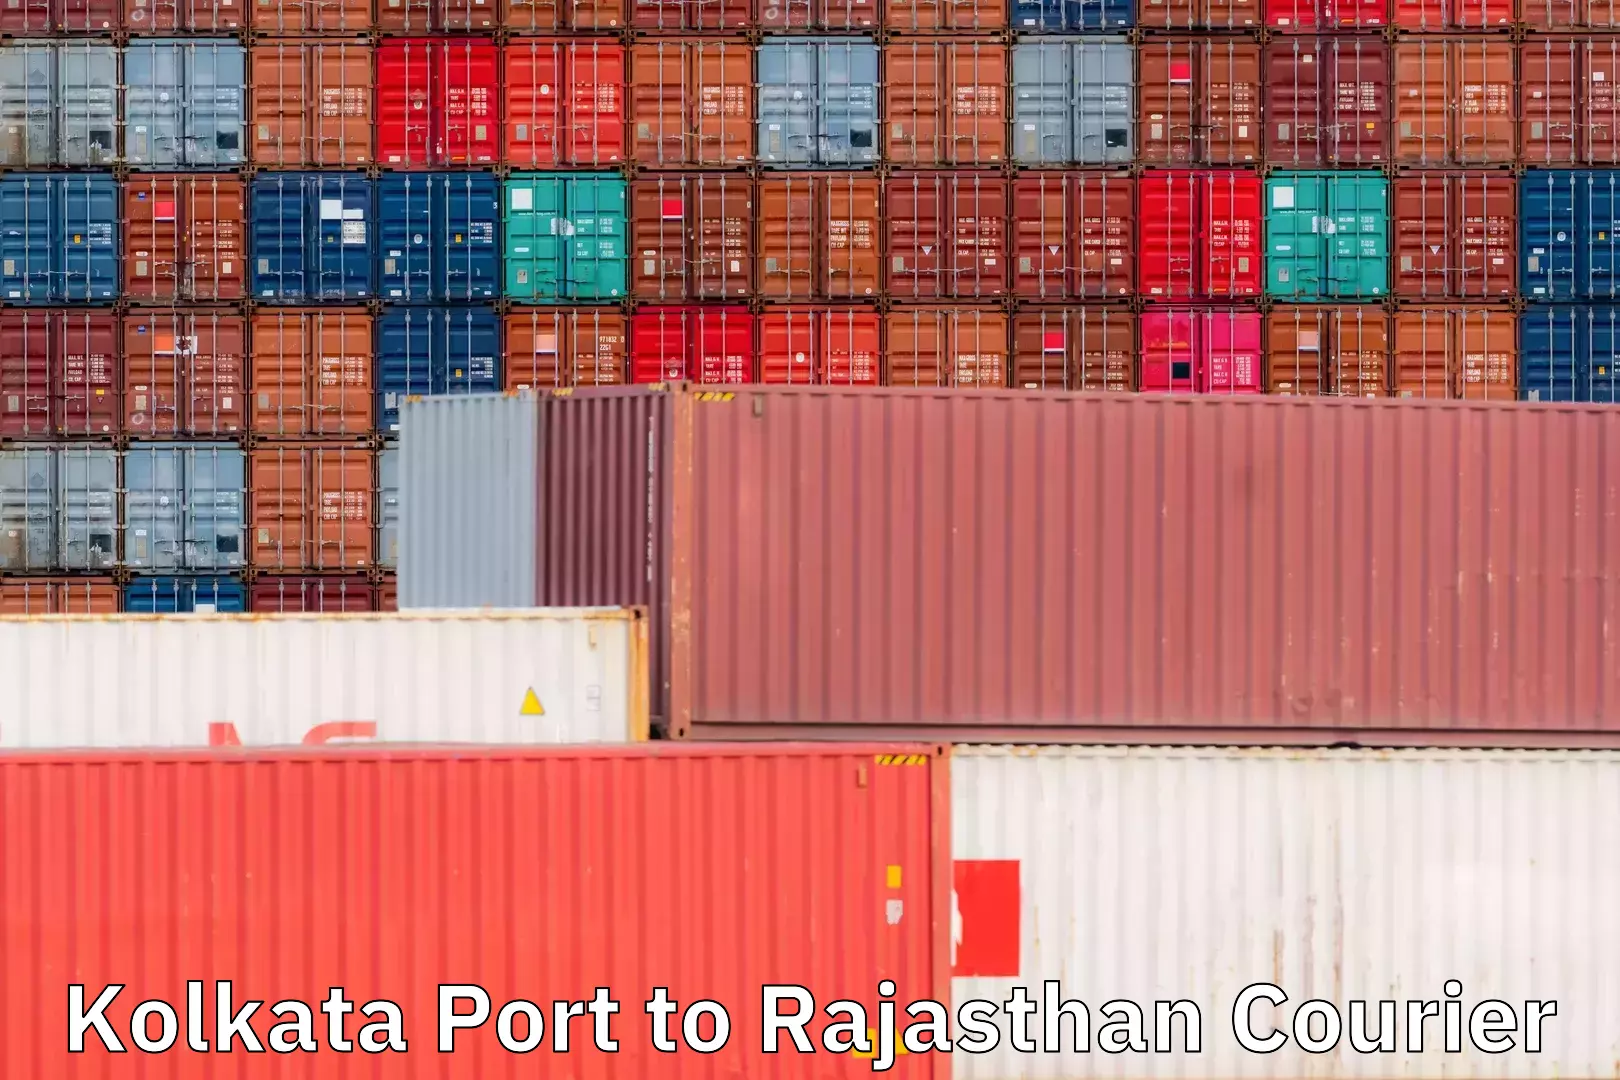 Large-scale shipping solutions Kolkata Port to Rajasthan